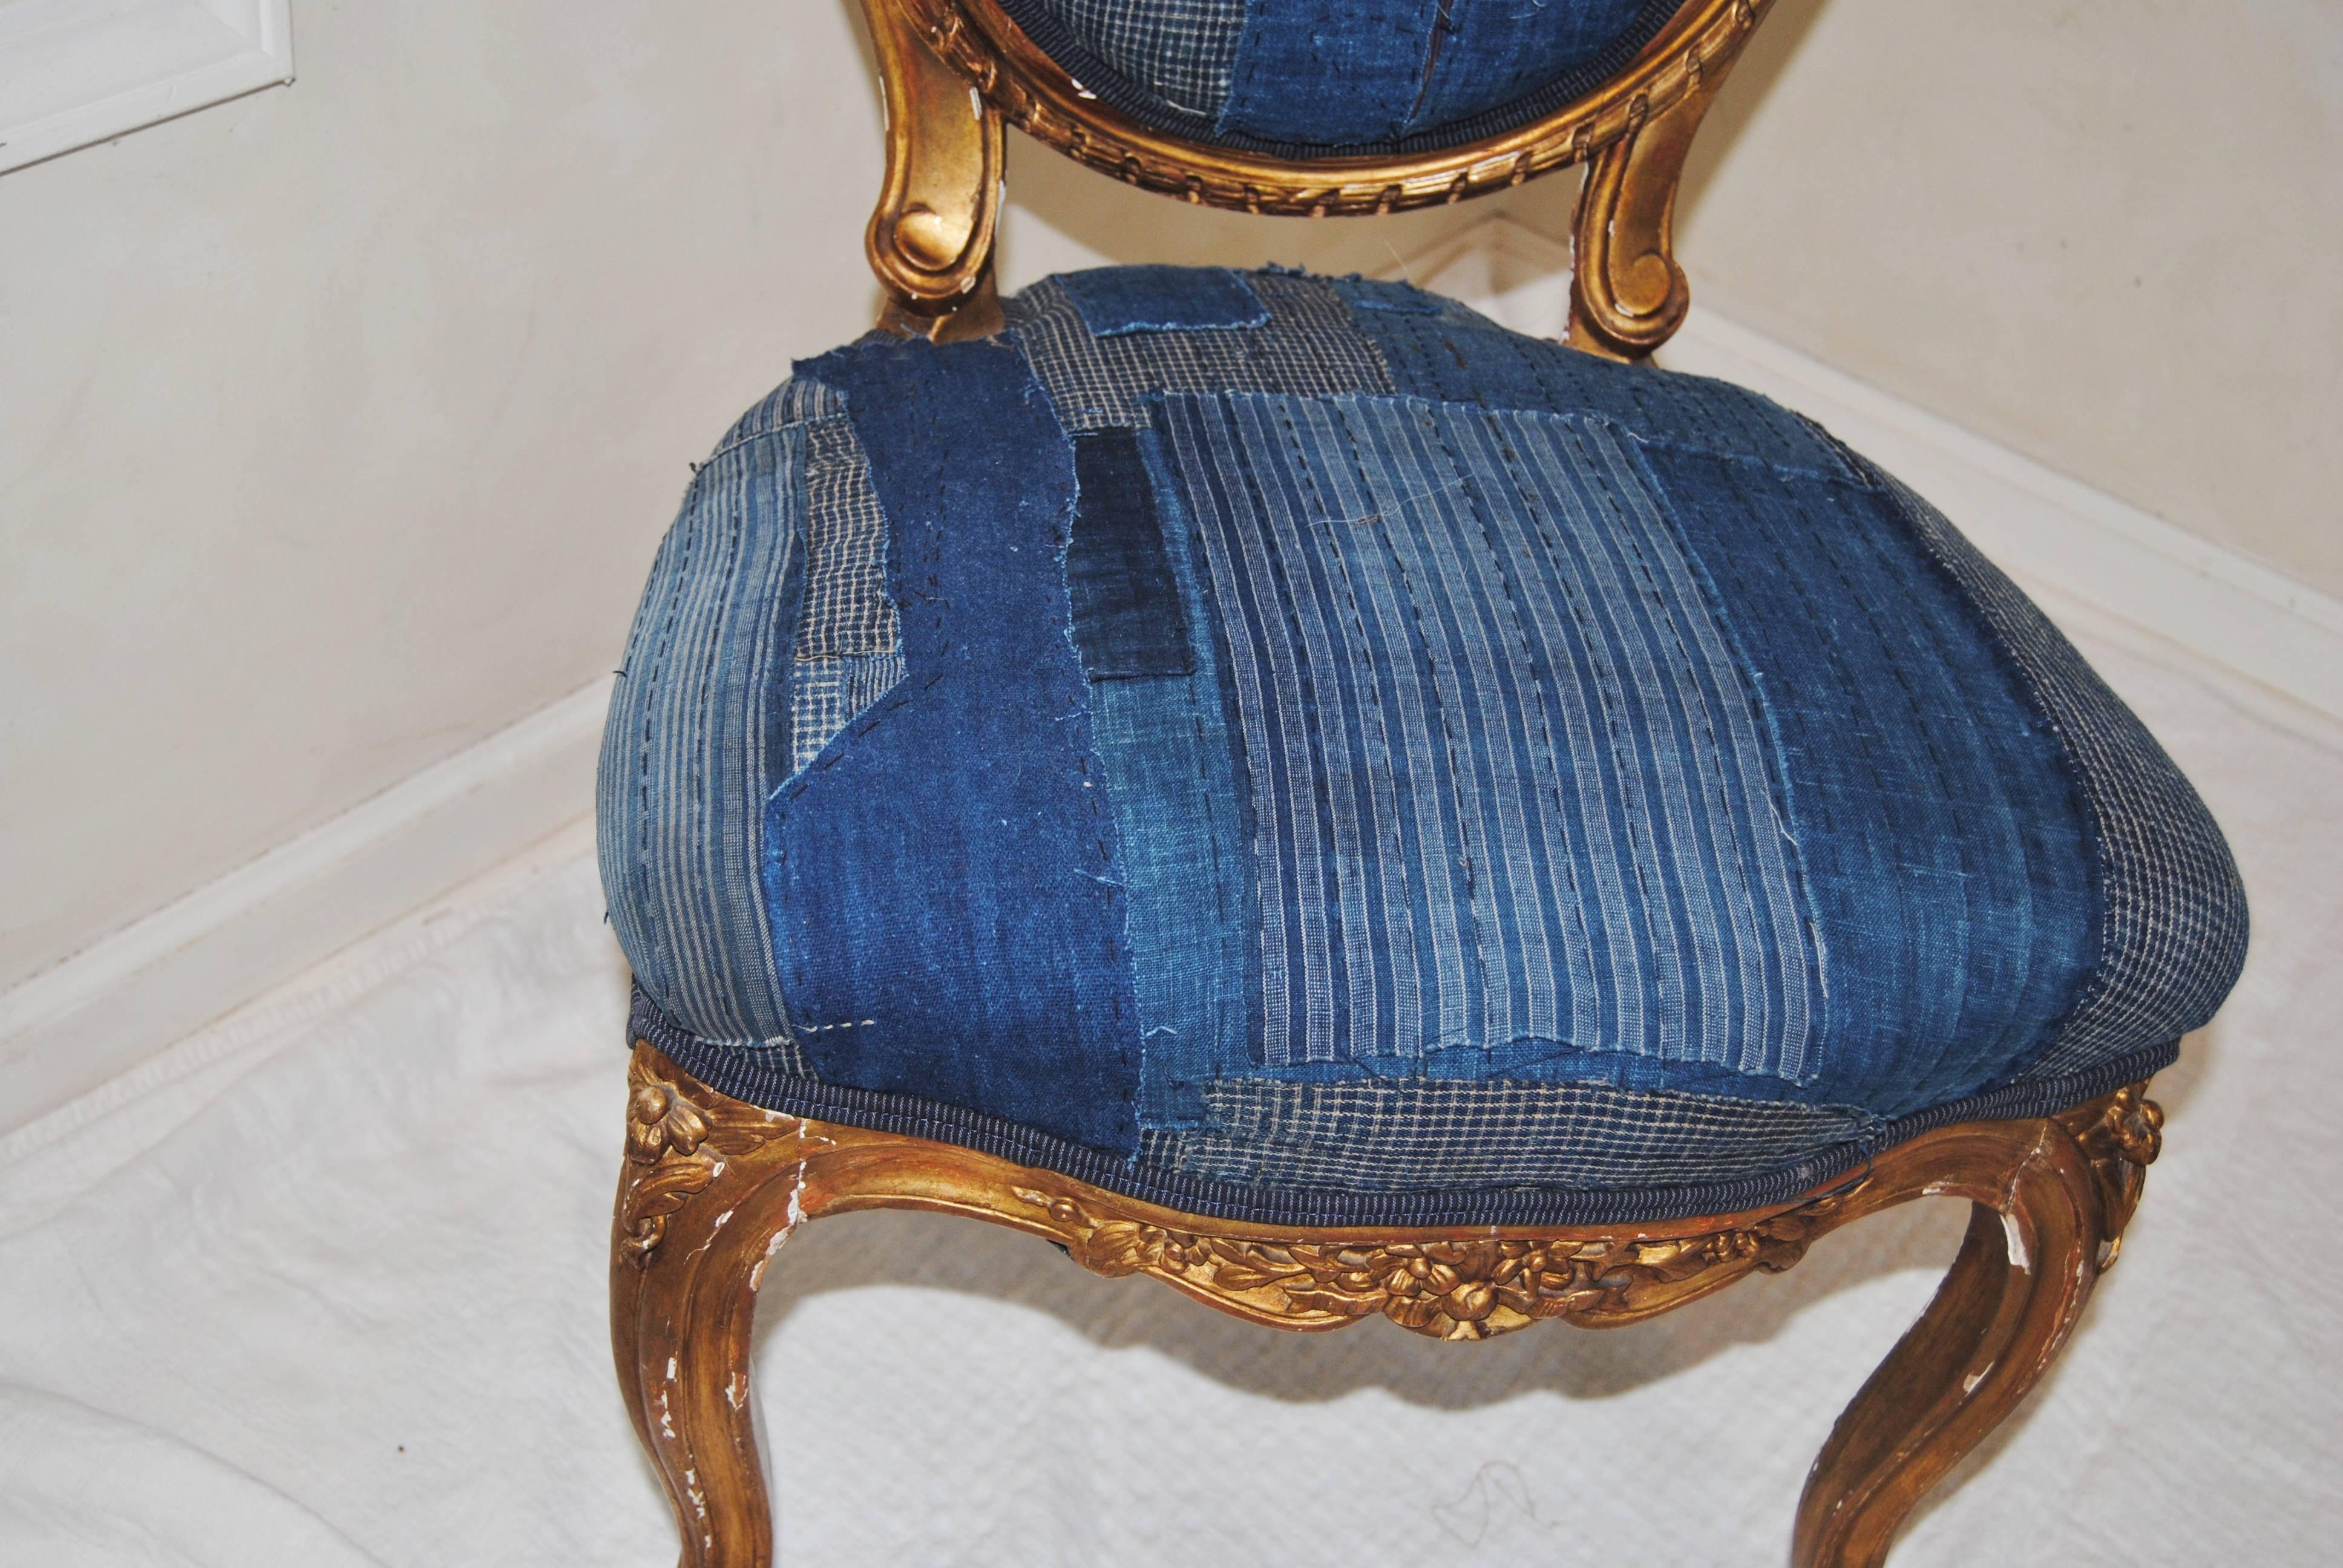 Bohemian Antique French Gilt Chair Upholstered in an Antique Japanese Indigo Boro Textile For Sale